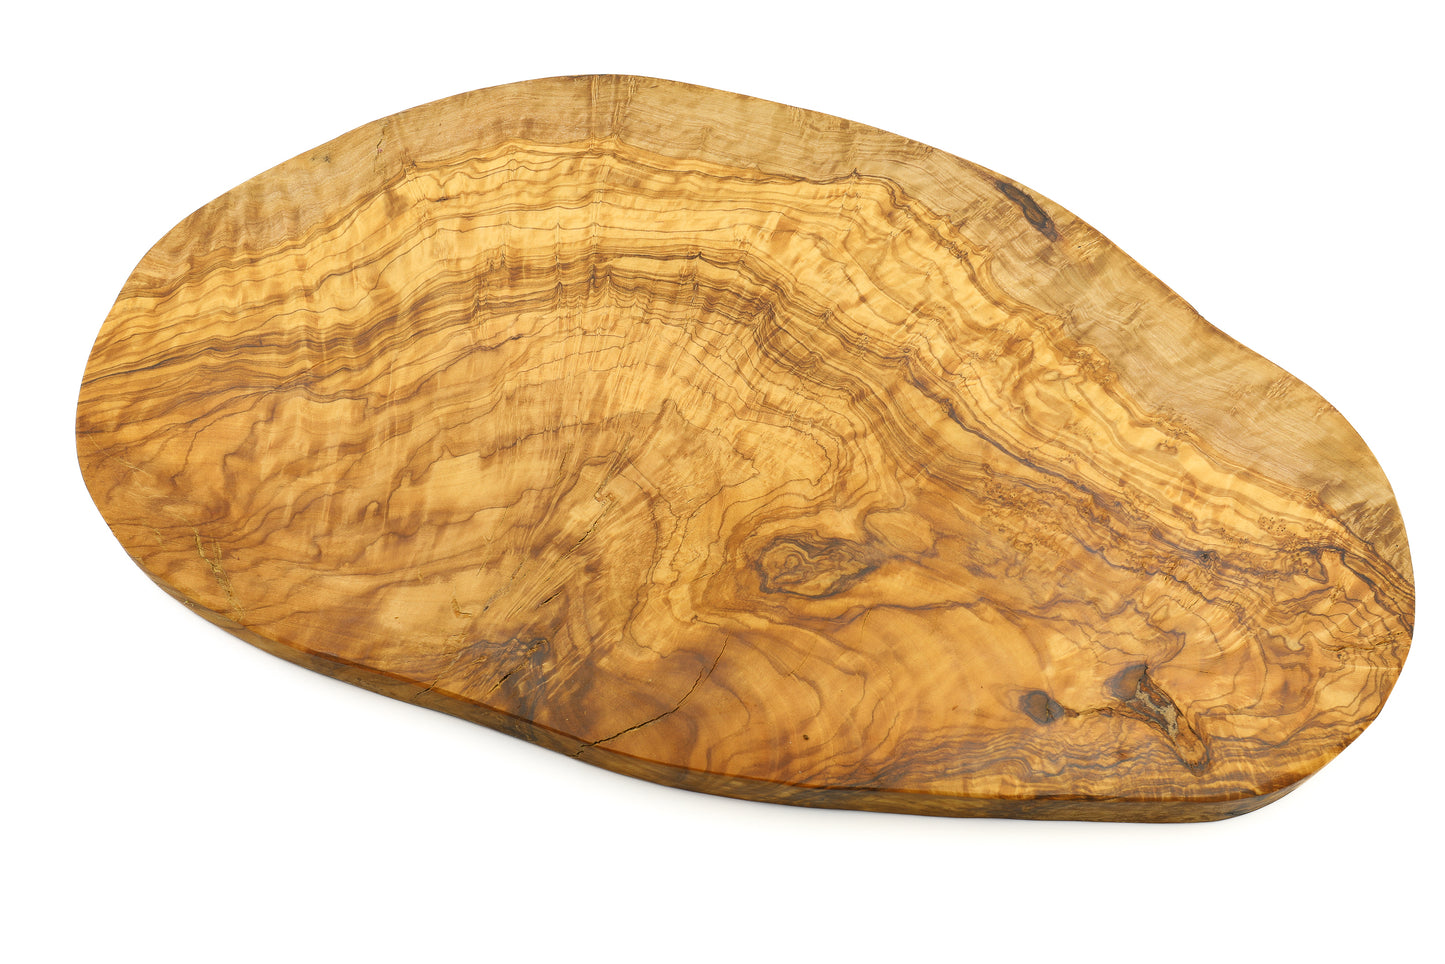 Handcrafted Olive Wood Chopping Board - Organic and Irregular in Design